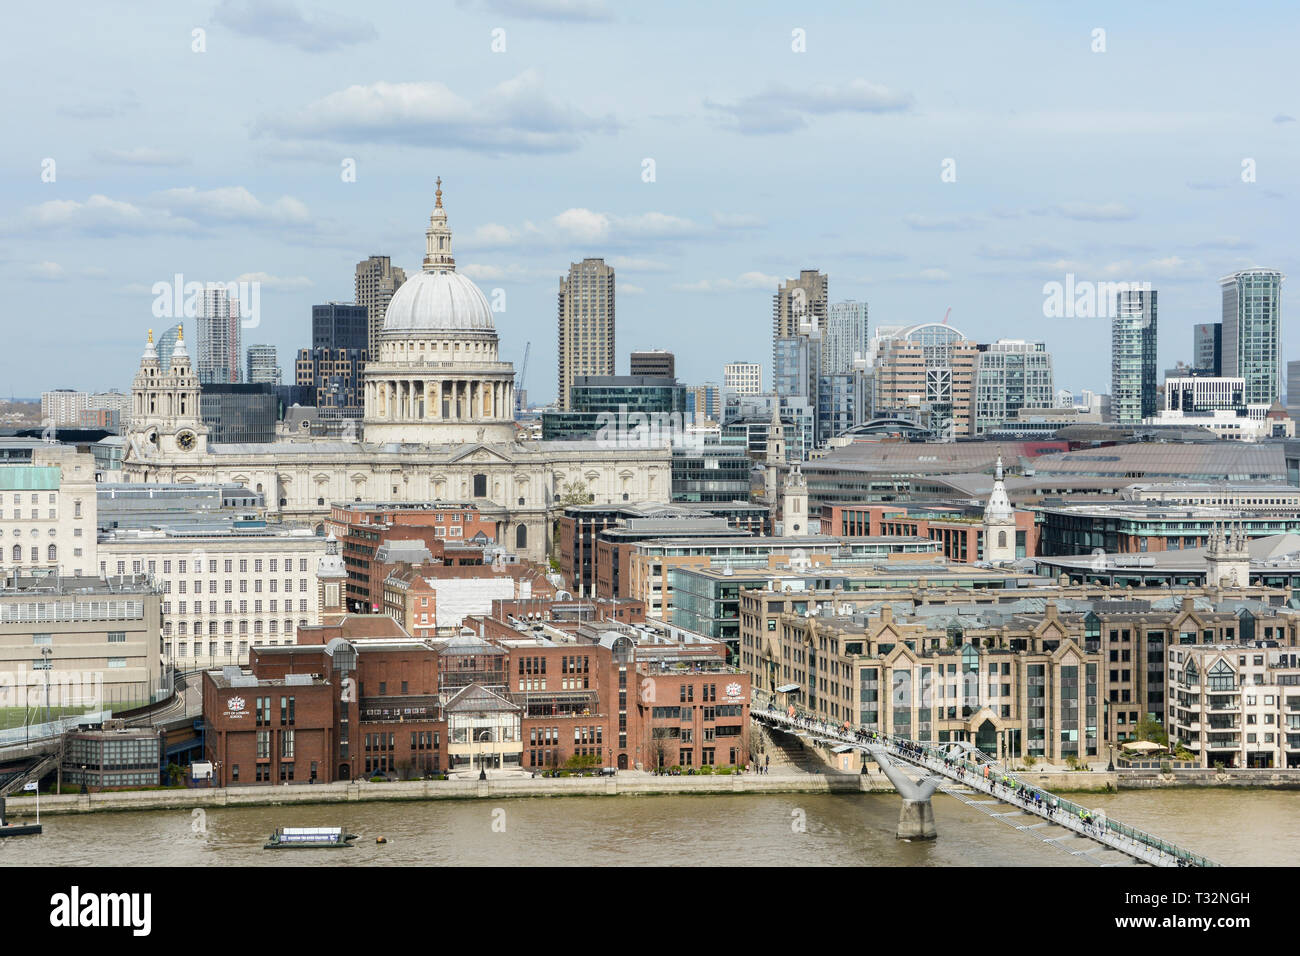 St Paul's Cathedral and the City of London skyline, London, UK Stock Photo